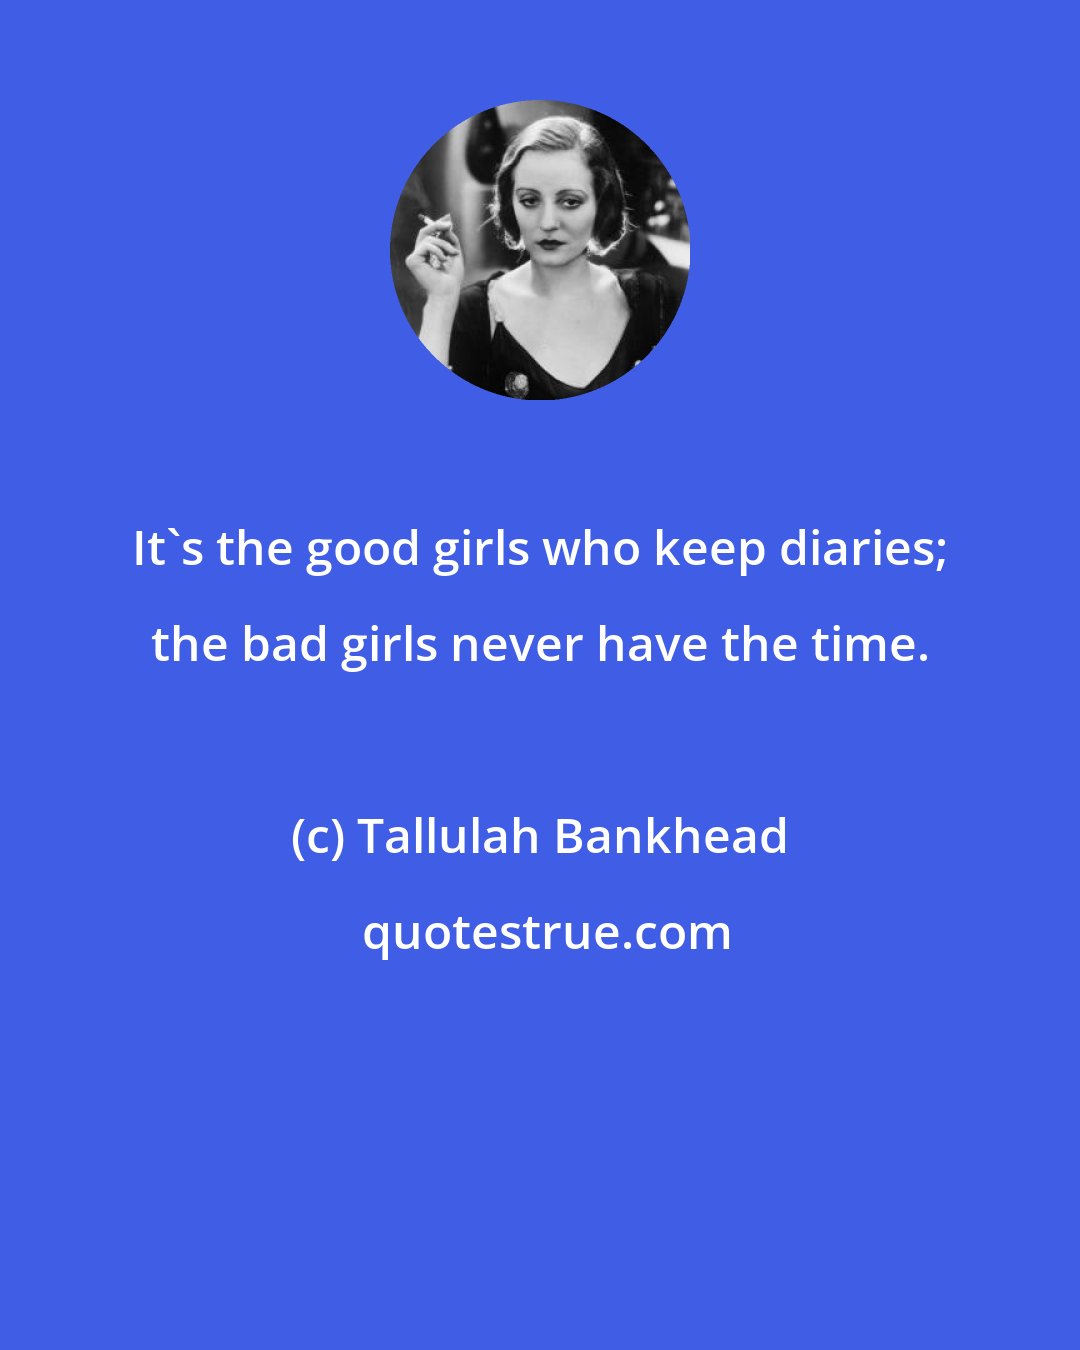 Tallulah Bankhead: It's the good girls who keep diaries; the bad girls never have the time.